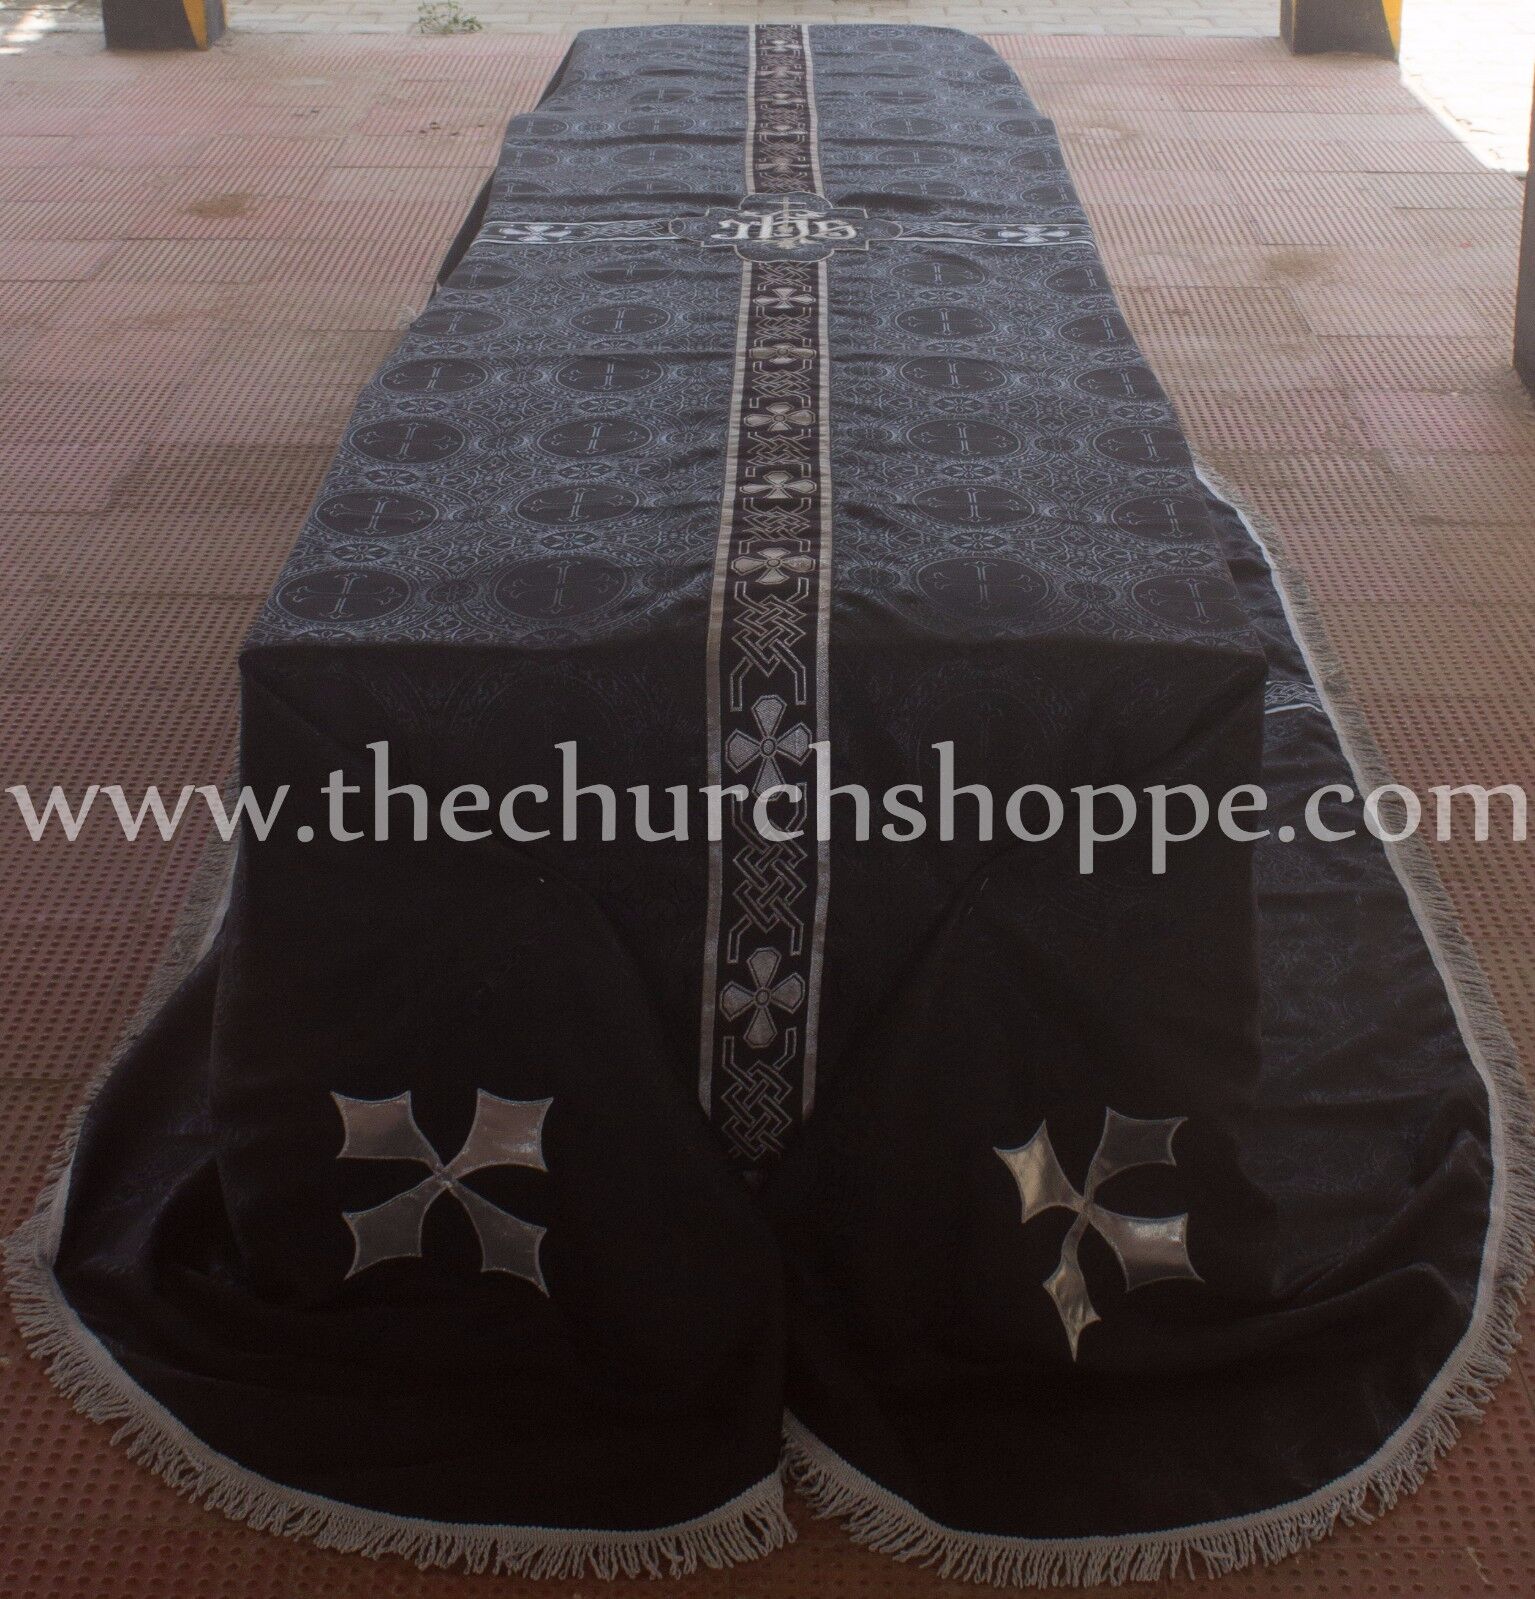 New Black Funeral Pall Size - 8'x12' Lined Catholic Requiem mass ,Funeral Pall